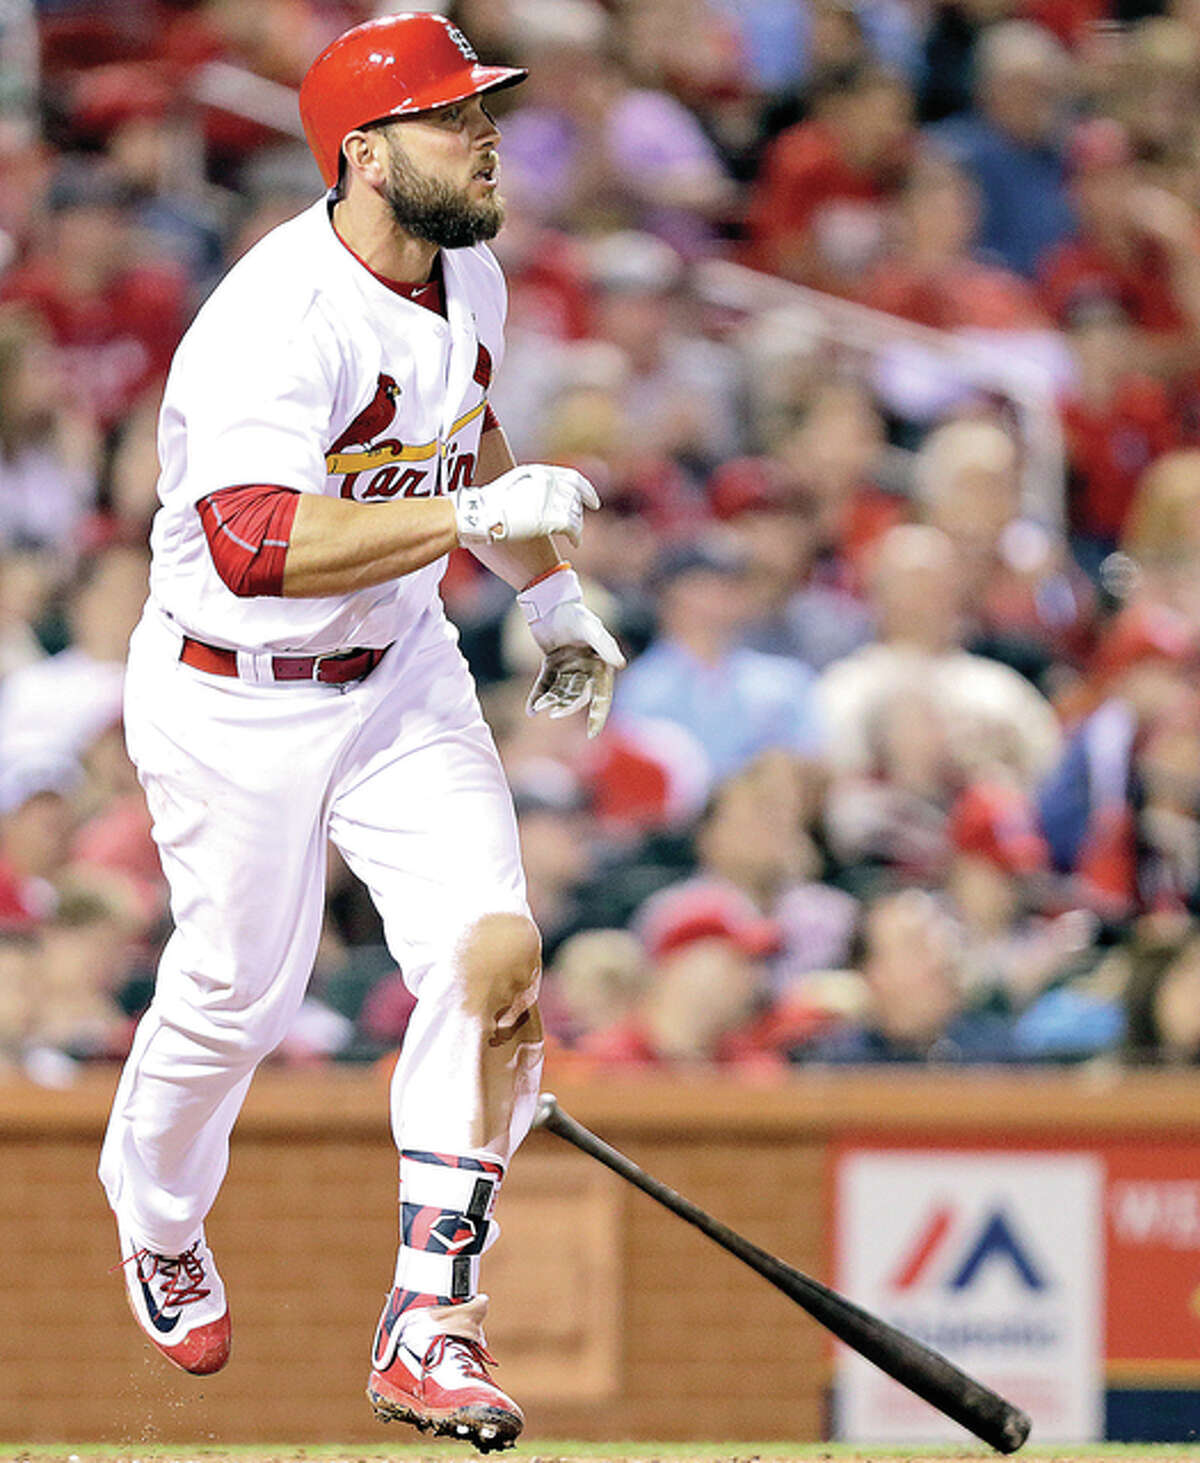 The Cardinals’ Matt Holliday watches his home run, his second of the game, in the sixth inning Friday night against the Cincinnati Reds at Busch Stadium.